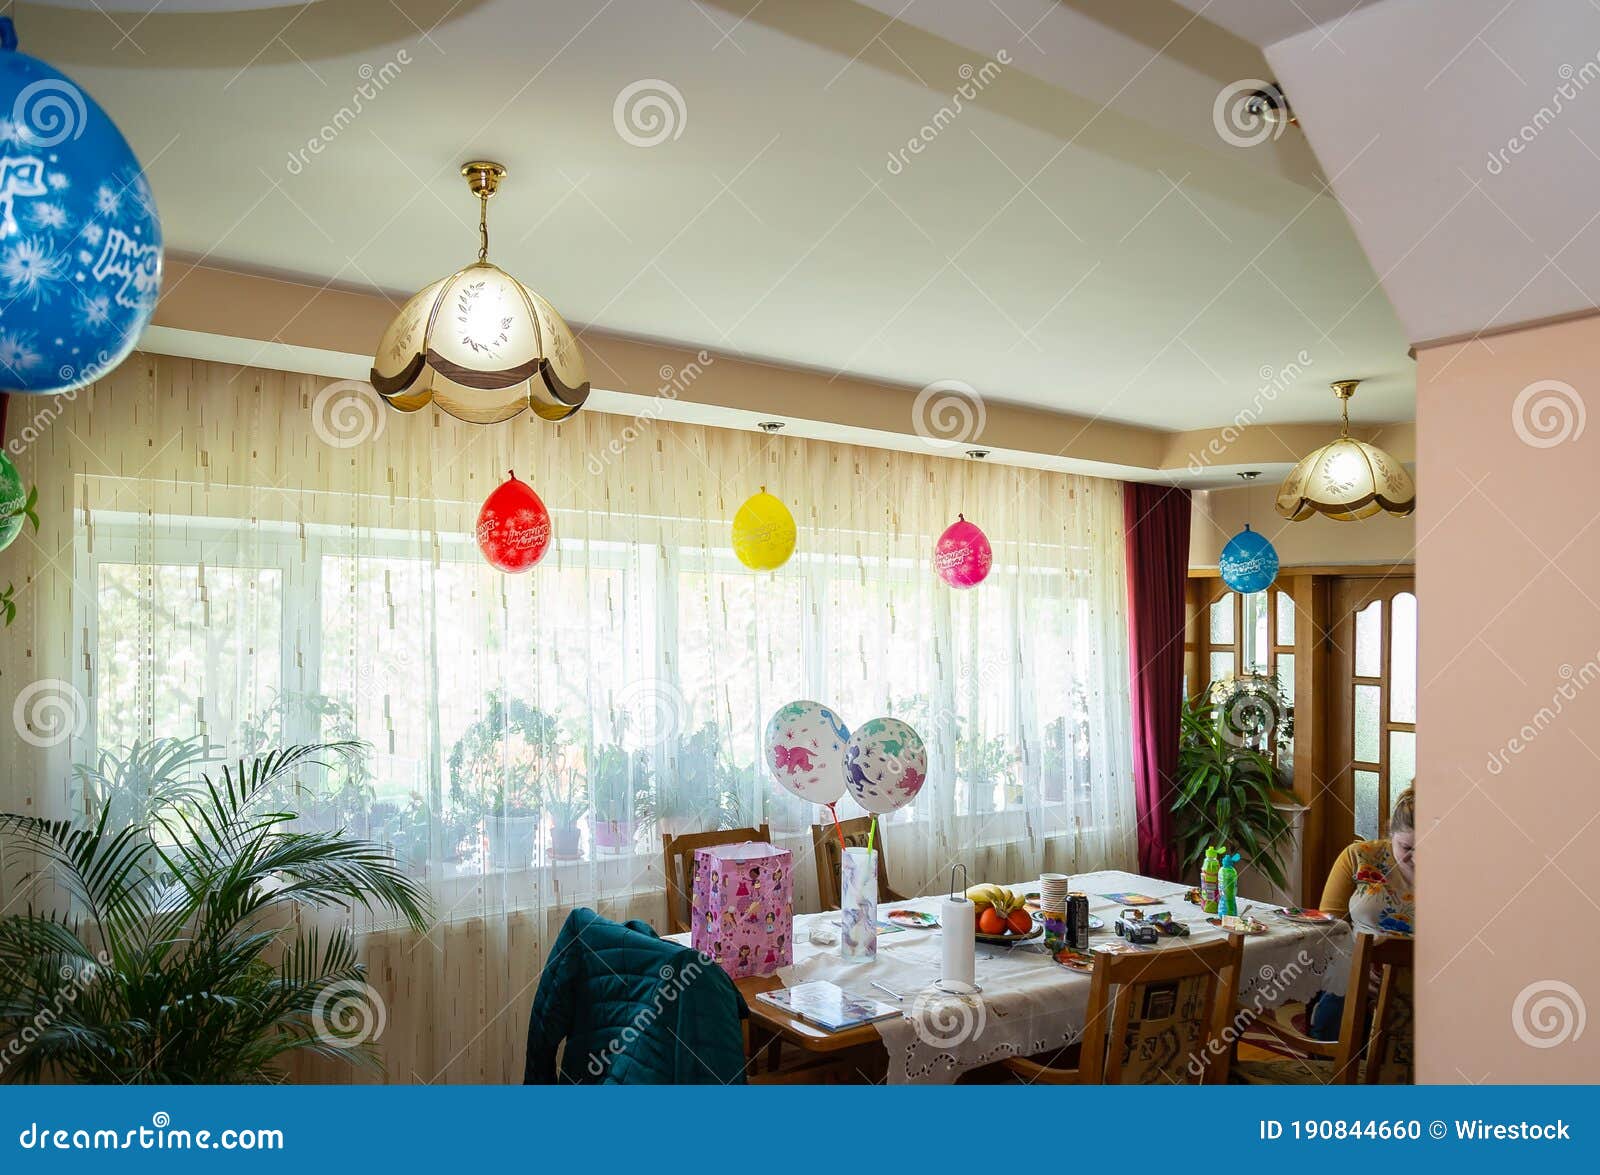 Interior of a Living Room with Balloons Hanging from the Ceiling ...